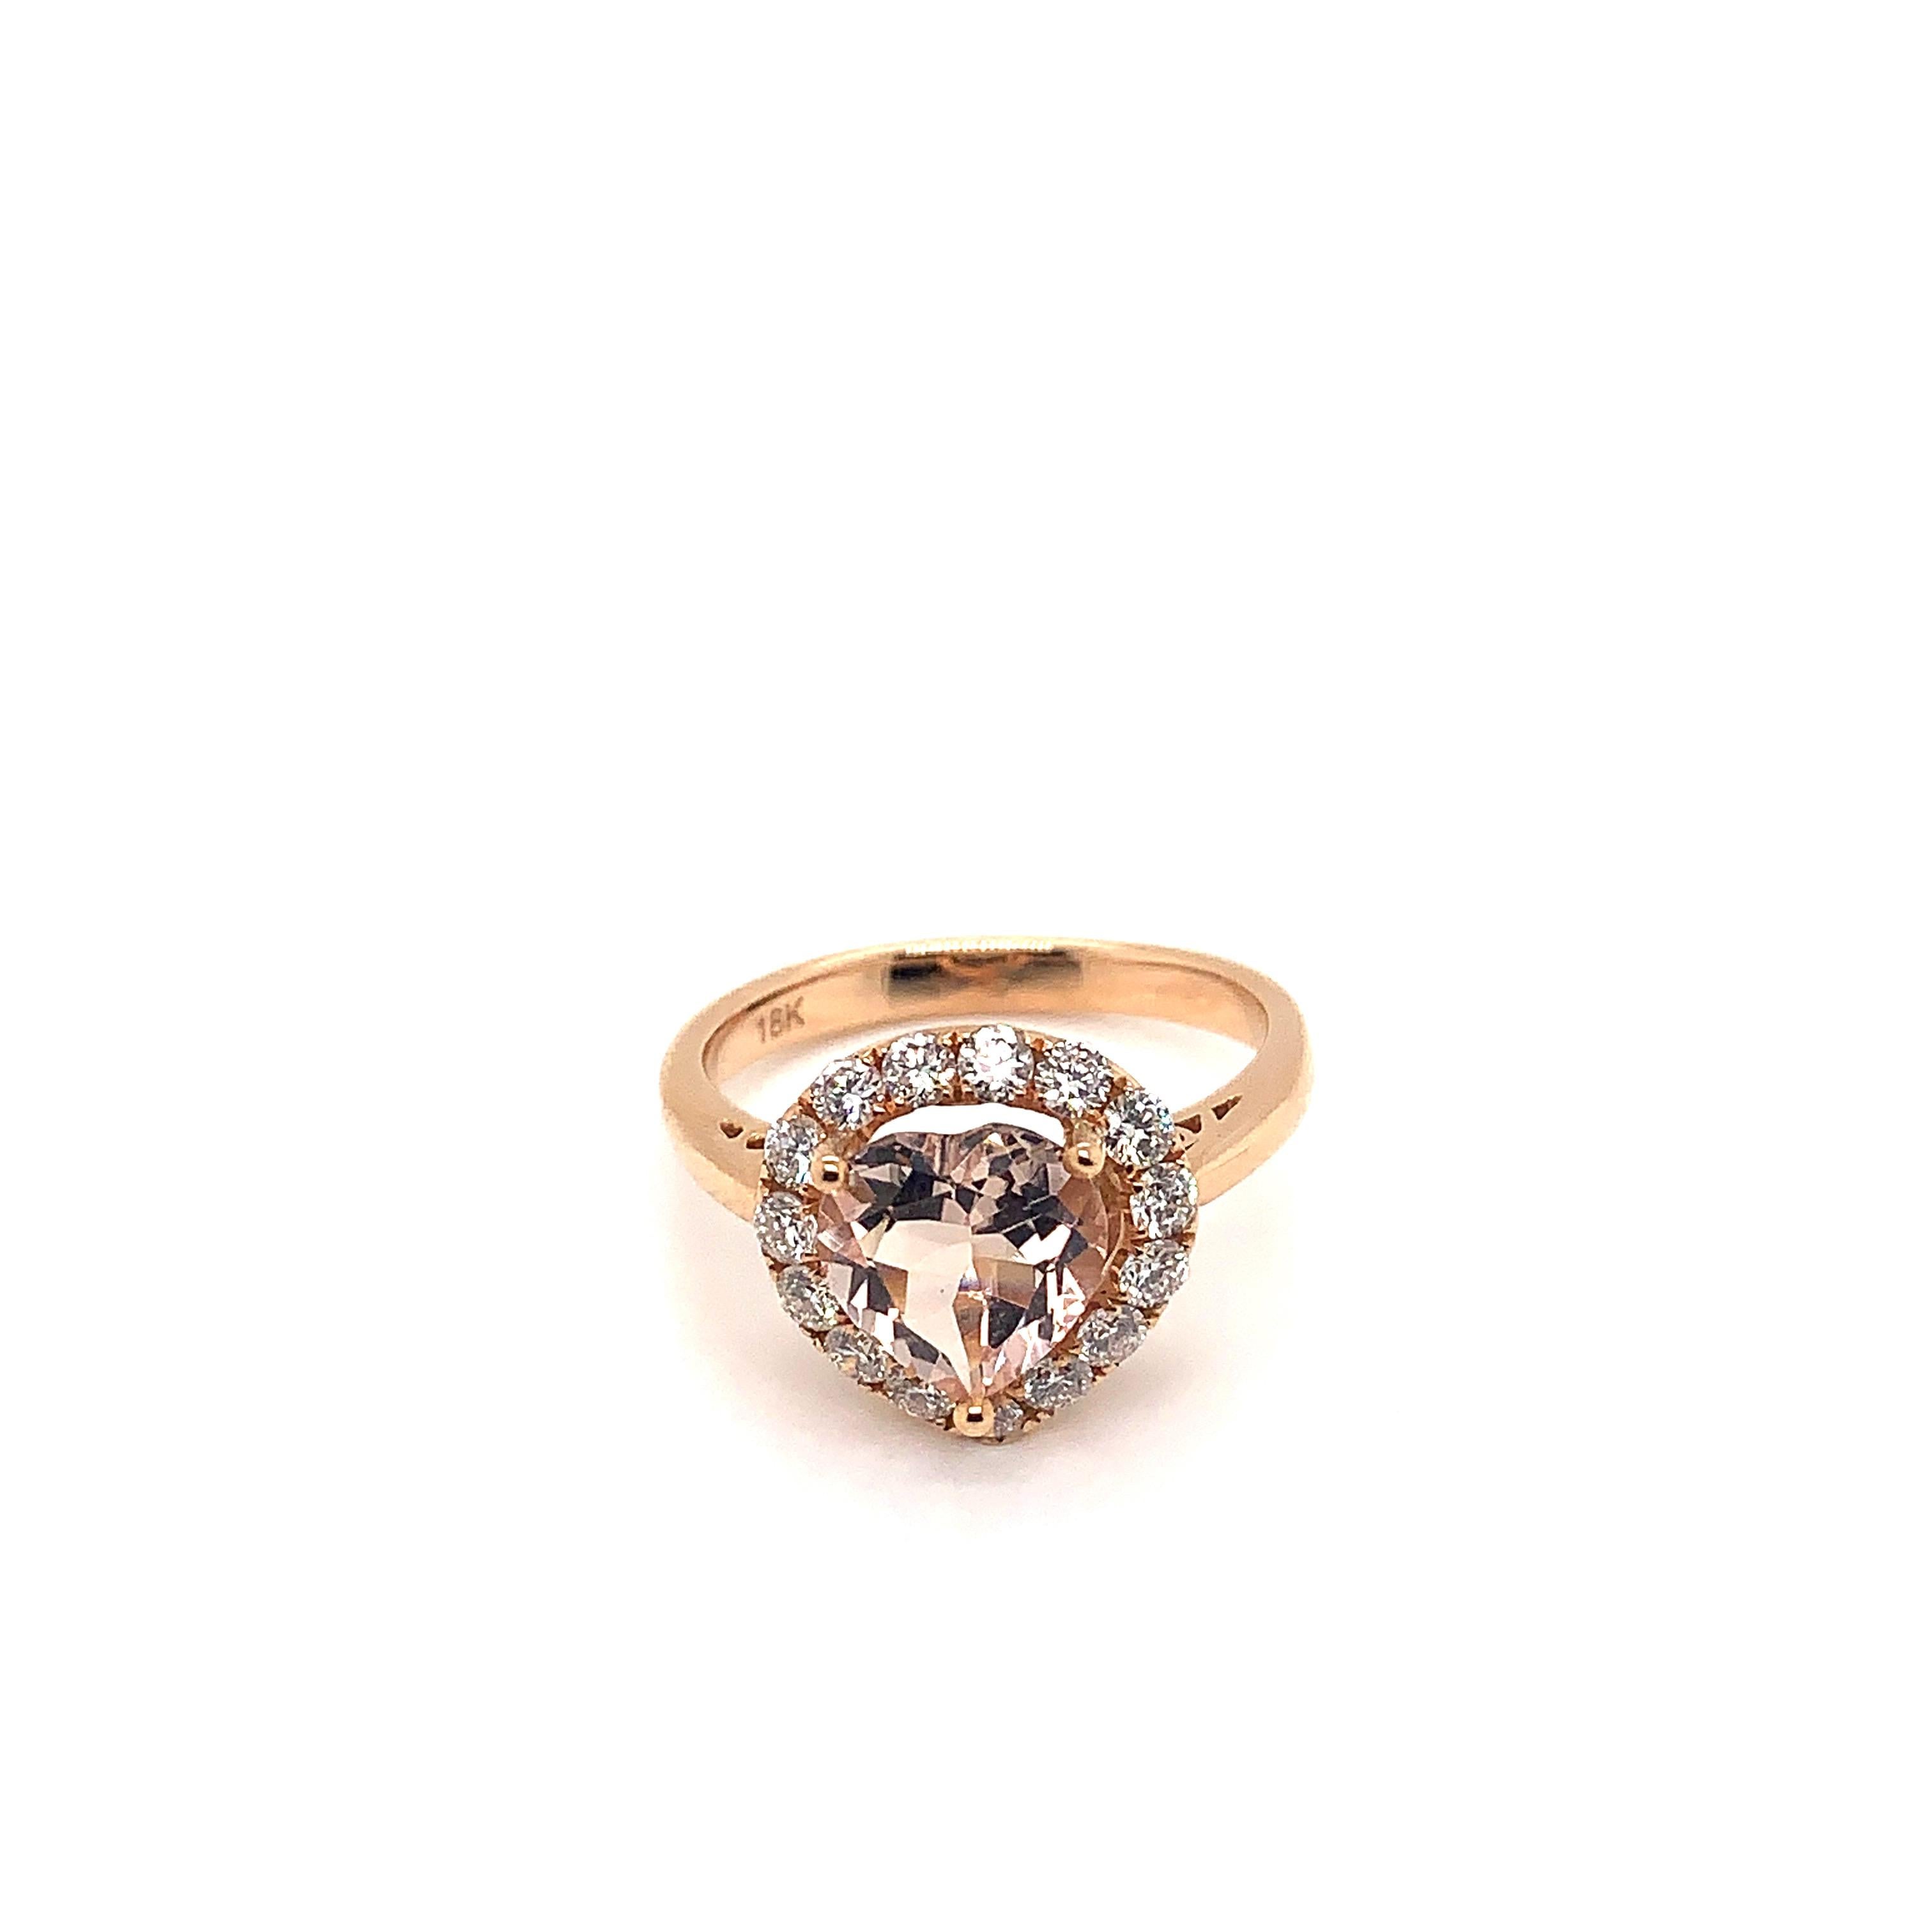 Classic morganite ring in 18K rose gold with diamonds. 

Morganite: 1.629 carat heart shape.
Diamonds: 0.558 carat, G colour, VS clarity. 
Gold: 4.188g, 18K rose gold. 